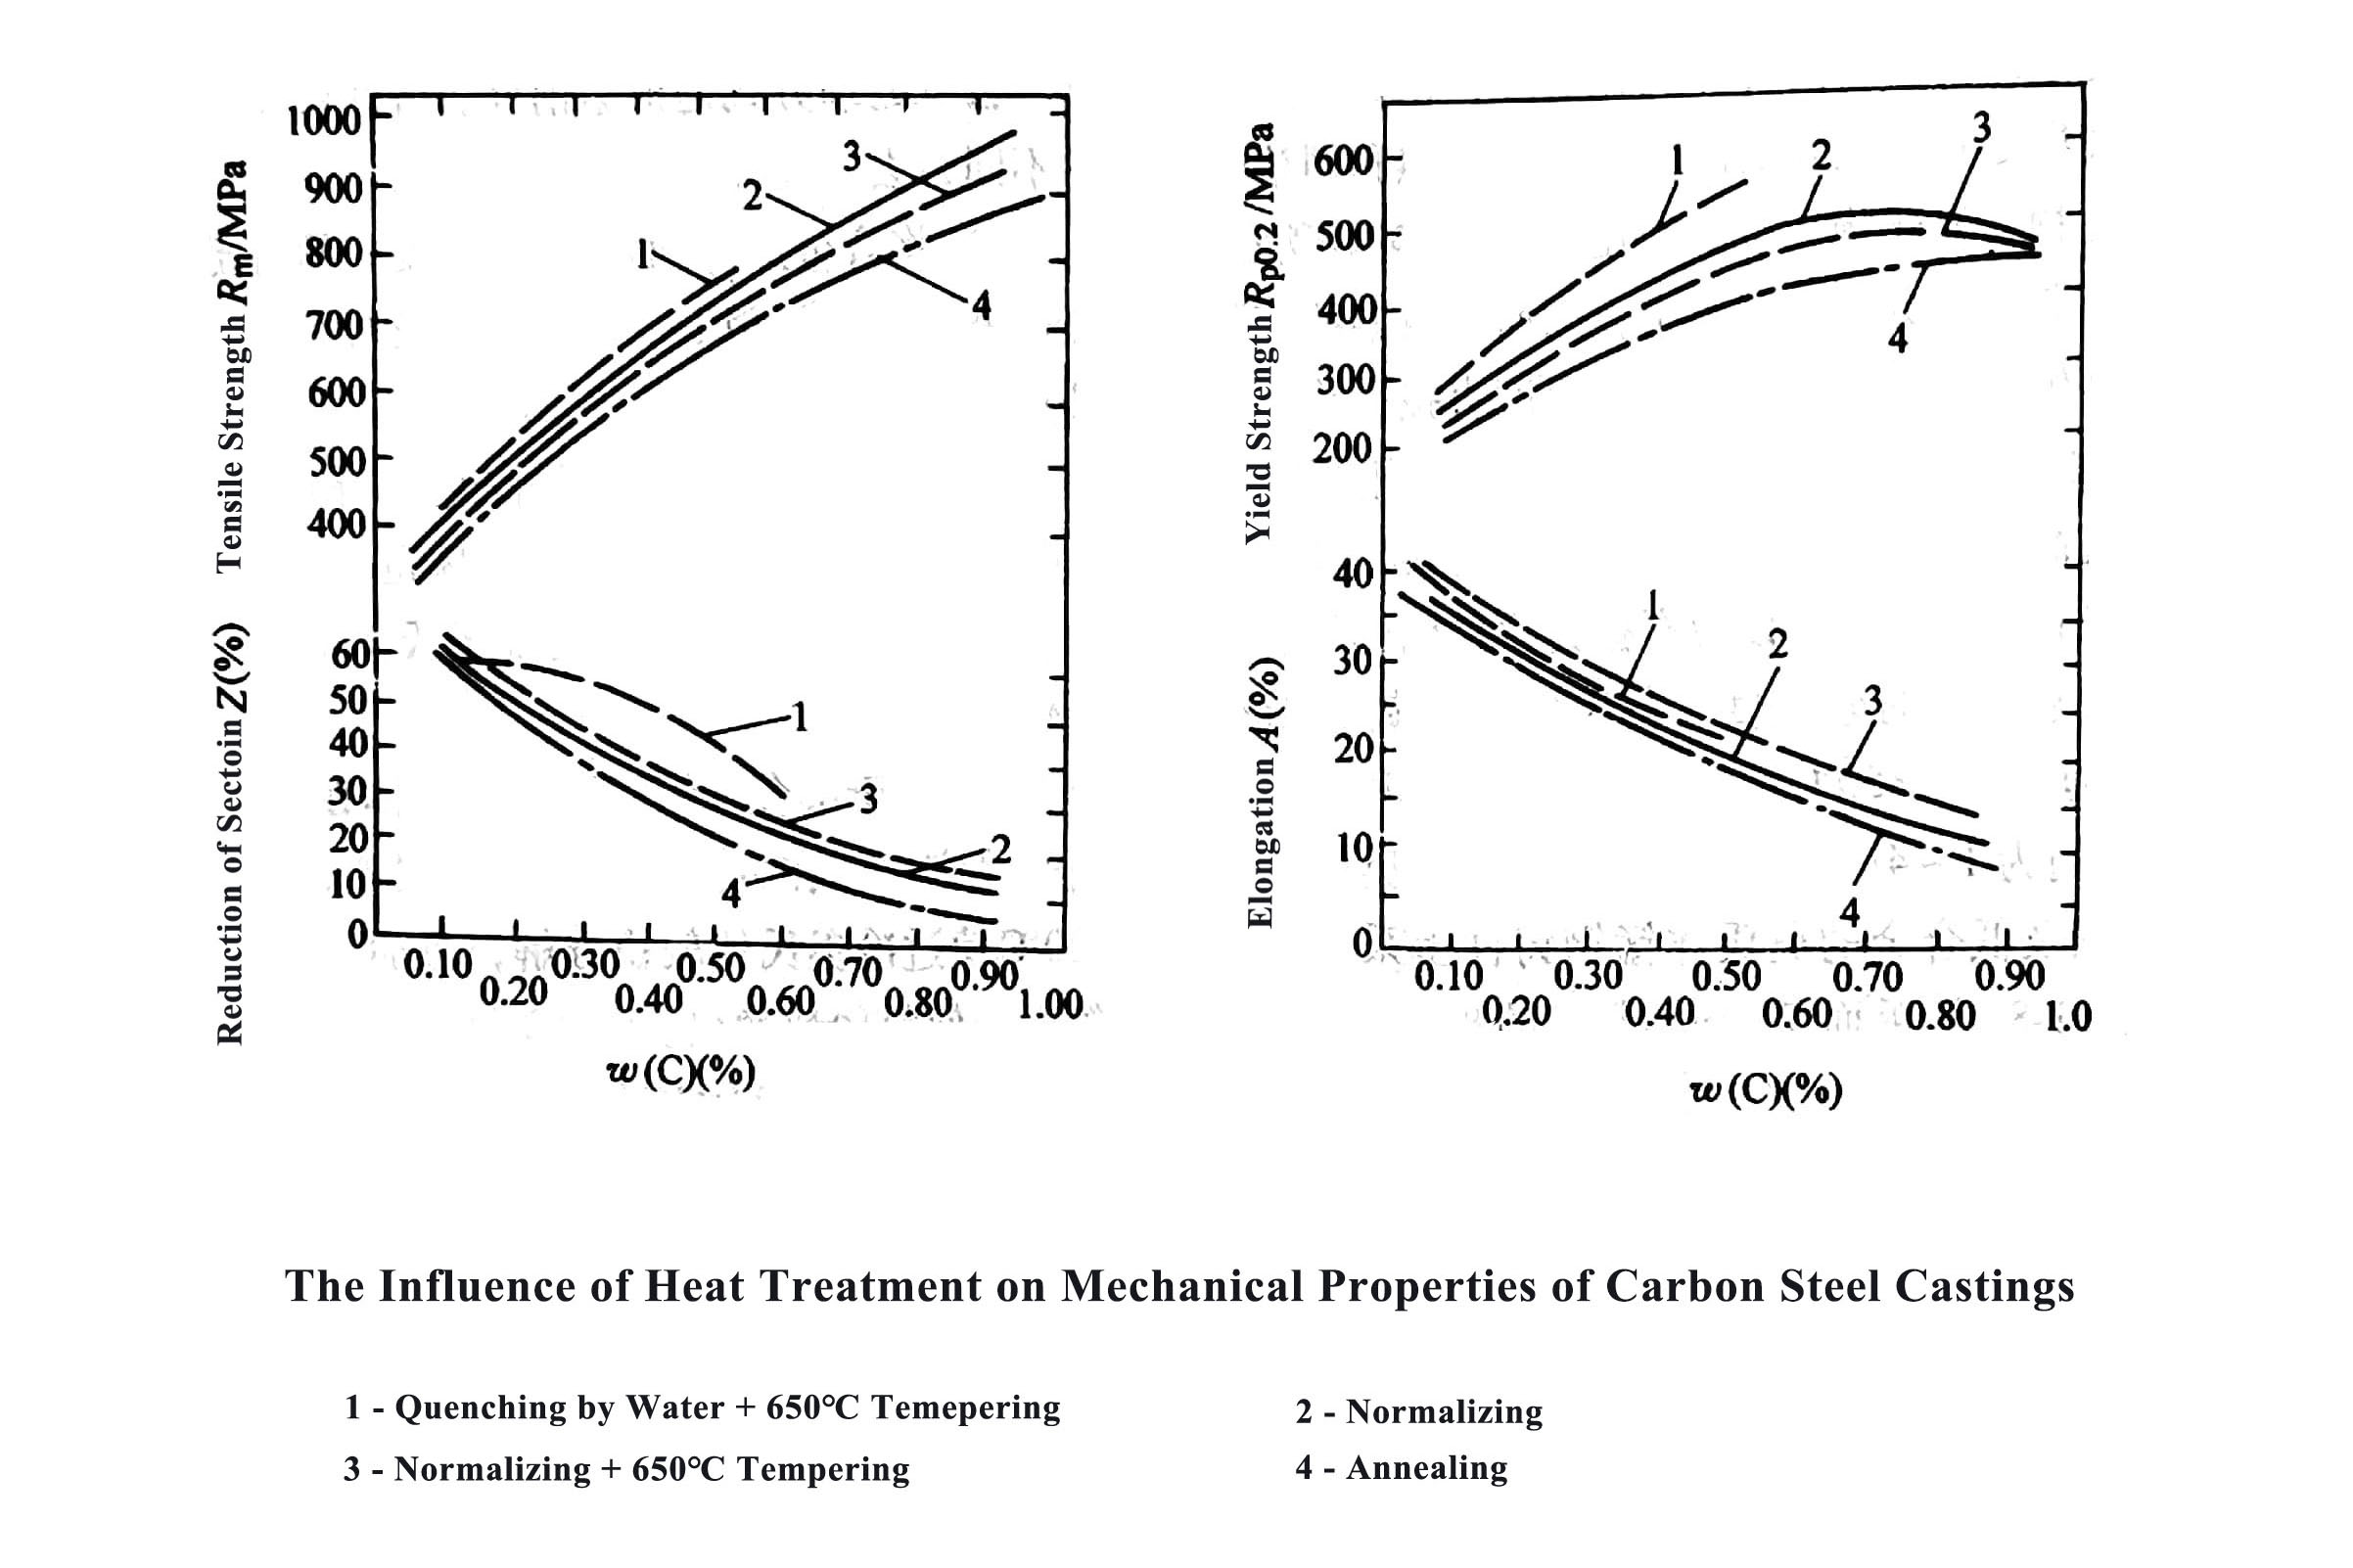 The Influence of Heat Treatment on Mechanical Properties of Carbon Steel Castings